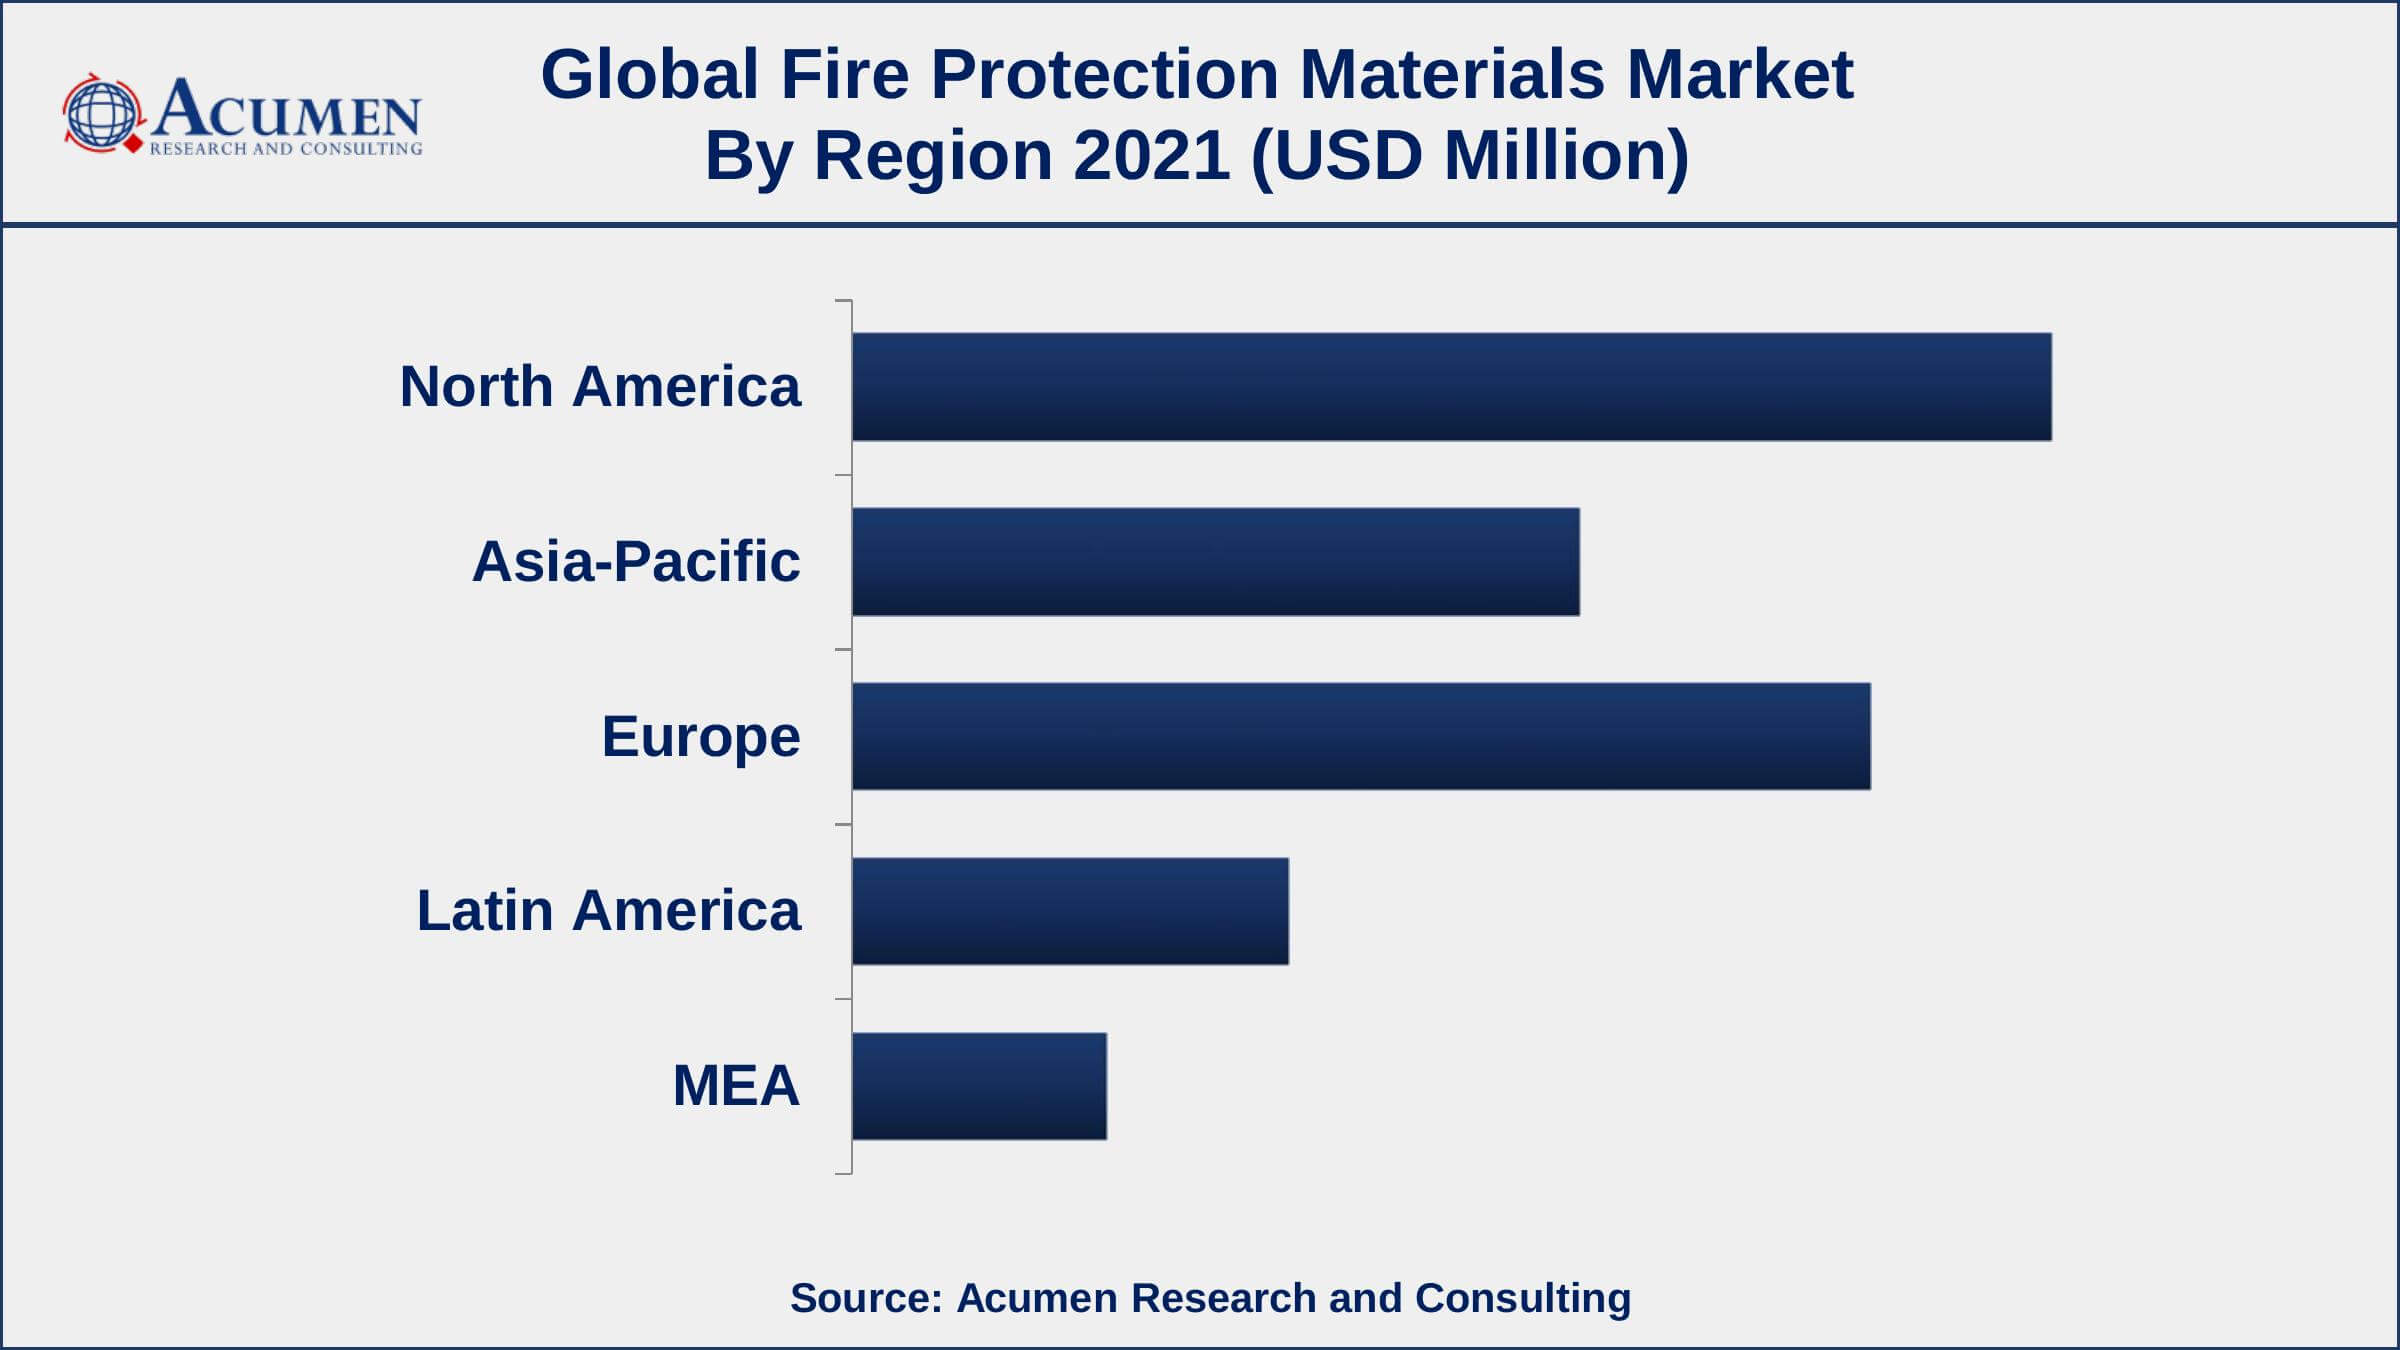 Growing number of fire incidents over the globe, drives the fire protection materials market size